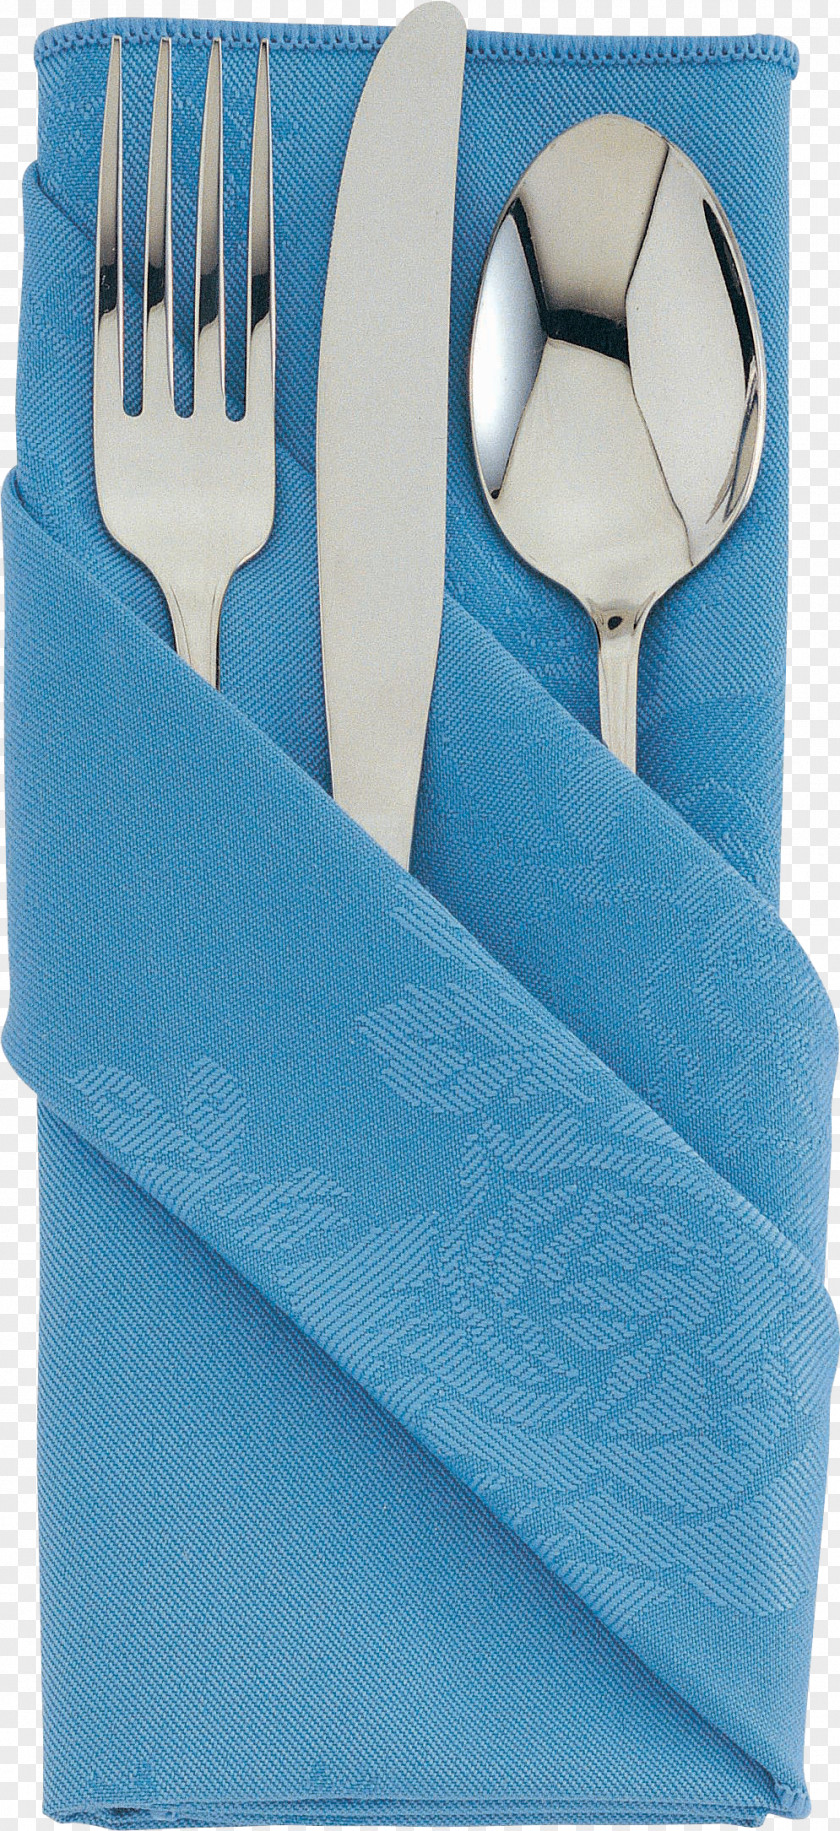 High-grade Napkin Wrapped Knife And Fork Material Spoon PNG